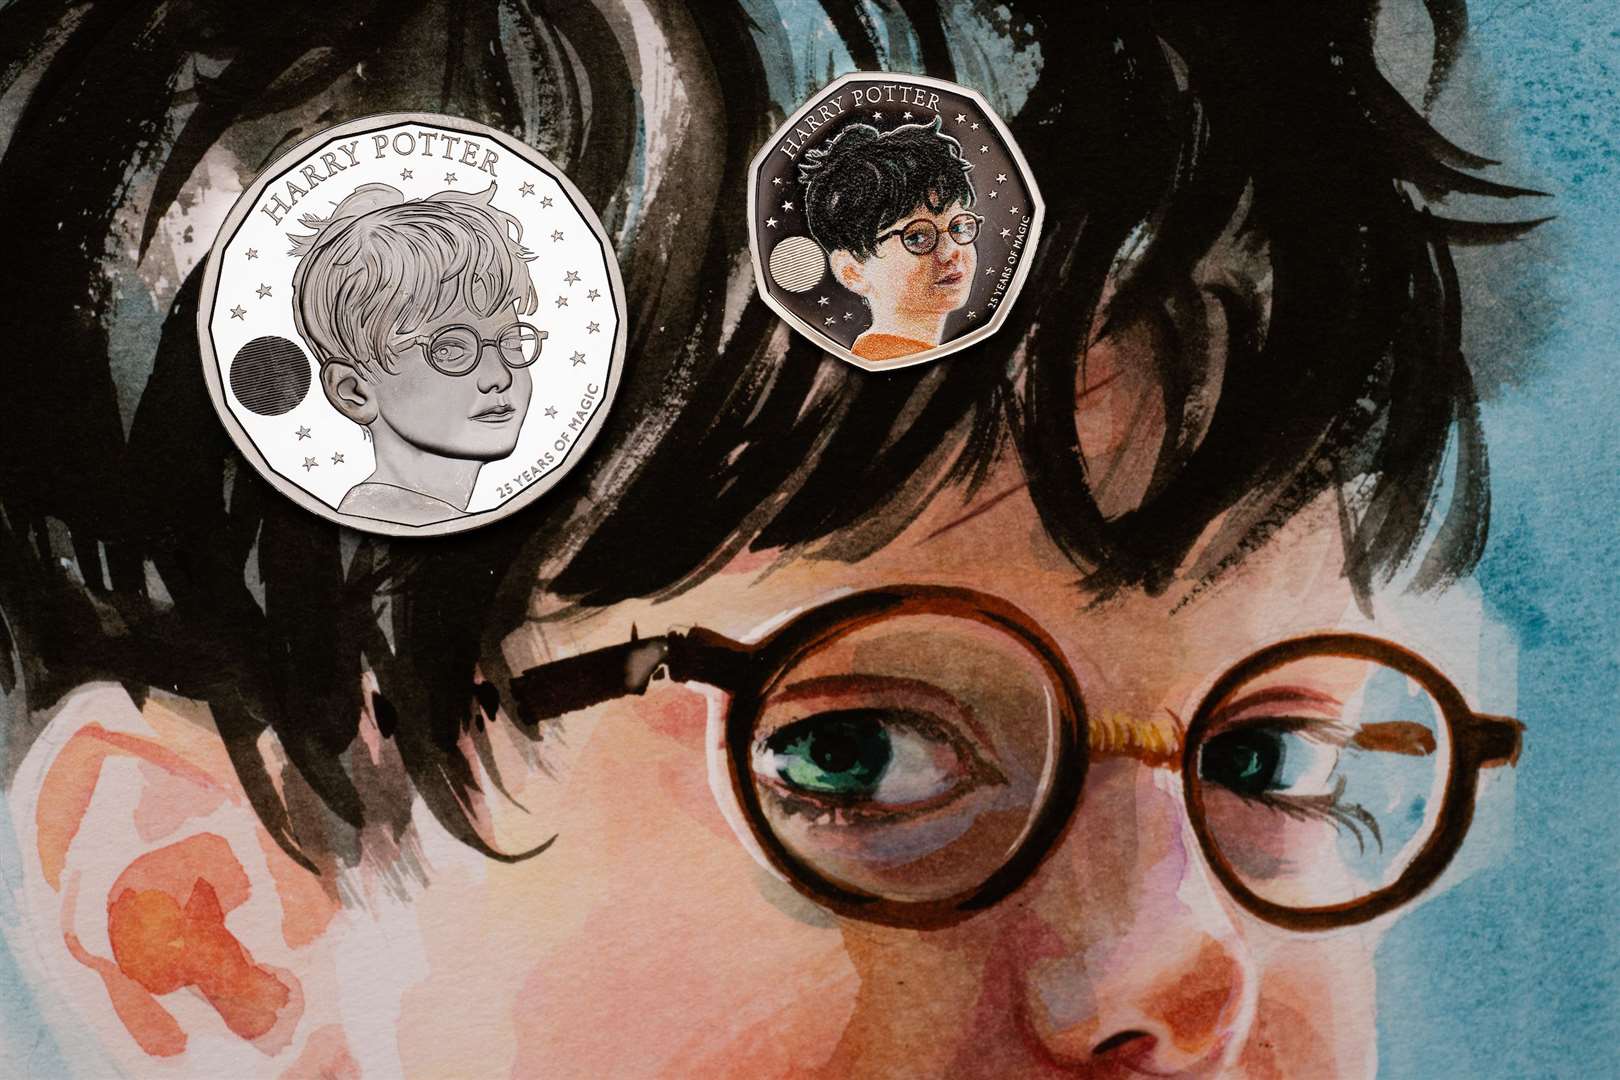 Harry Potter's face was chosen for the first release in October